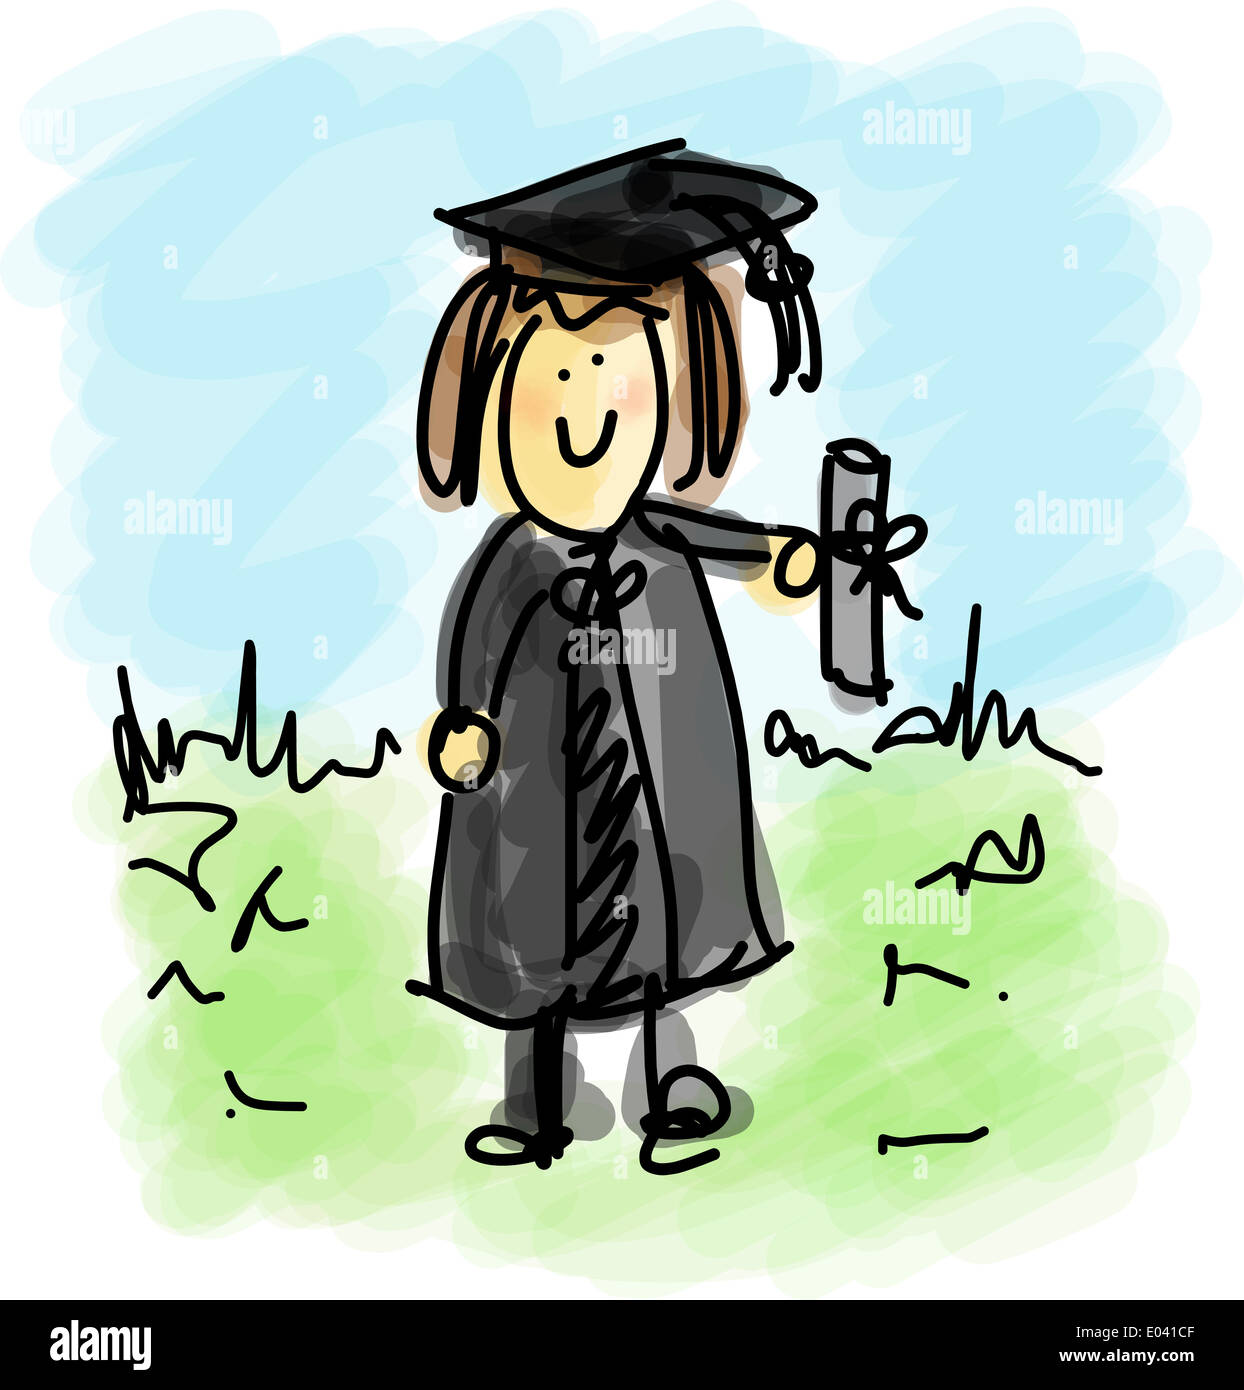 Illustration of a graduate gaining a degree Stock Photo